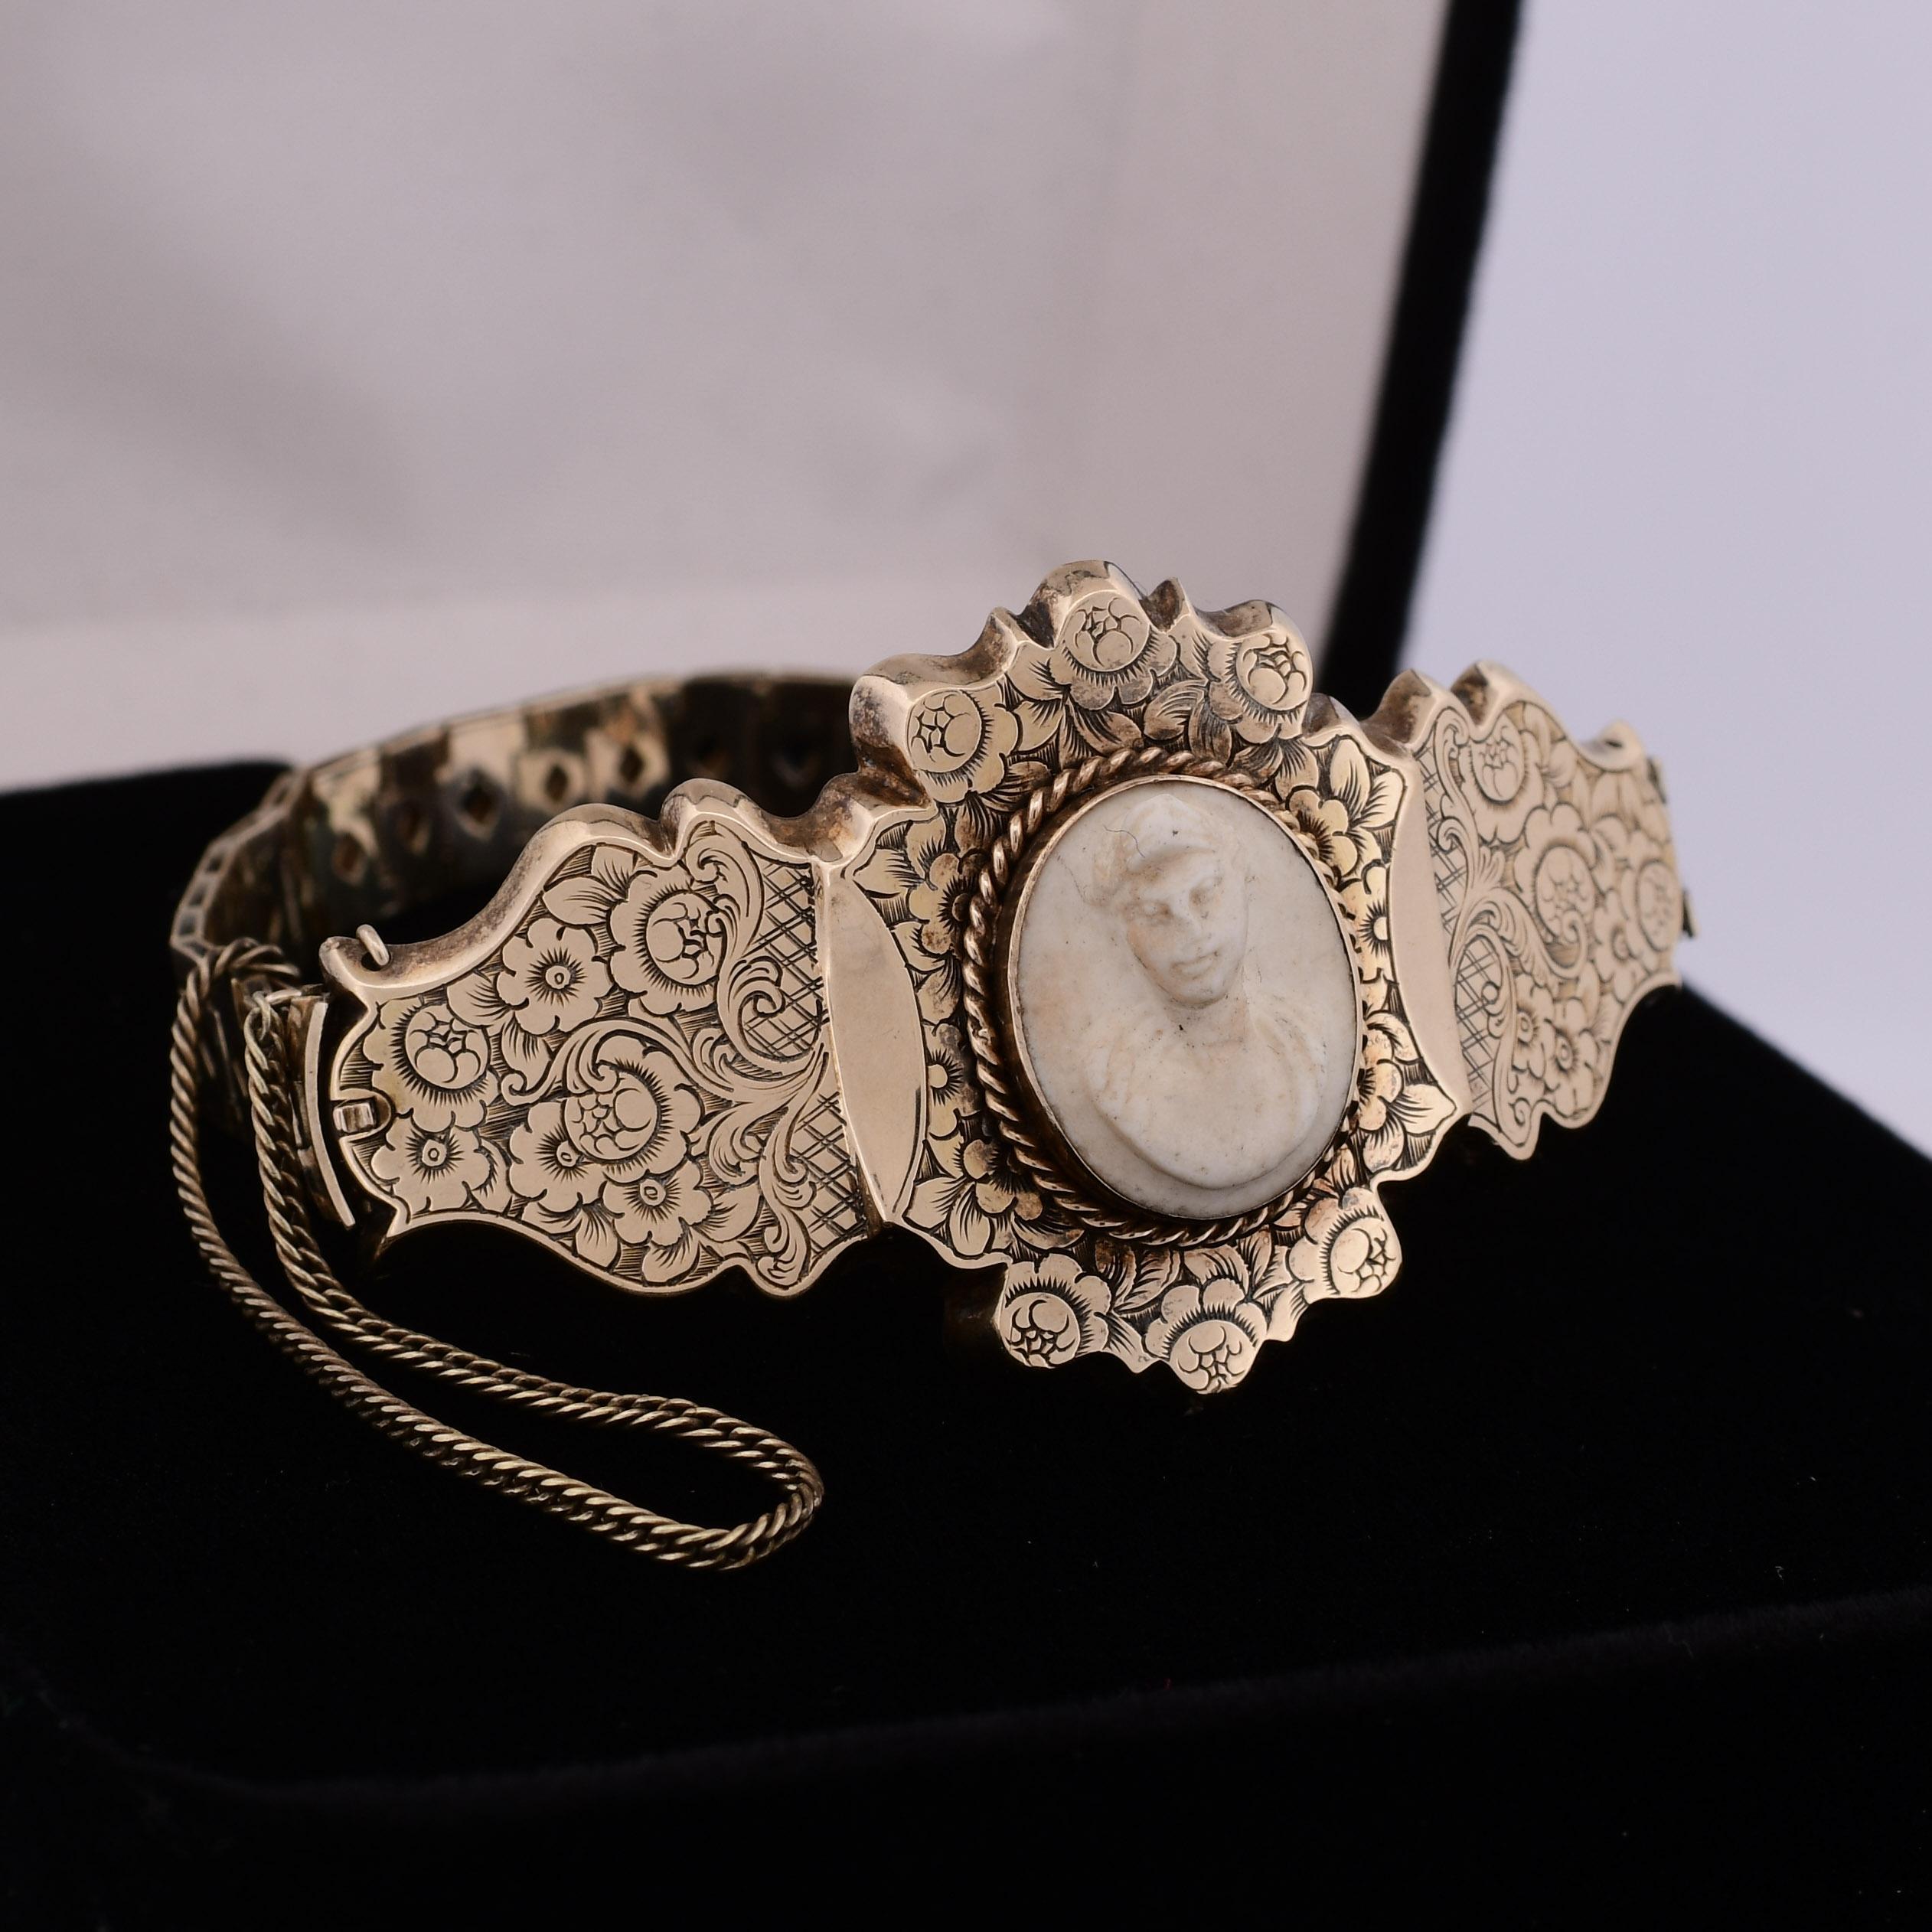 Enter the enchanting world of the Victorian era with this exquisite 14K antique Victorian cameo bracelet, a true embodiment of timeless elegance. The centerpiece of this bracelet is a delicate and intricately carved cameo, showcasing the profile of